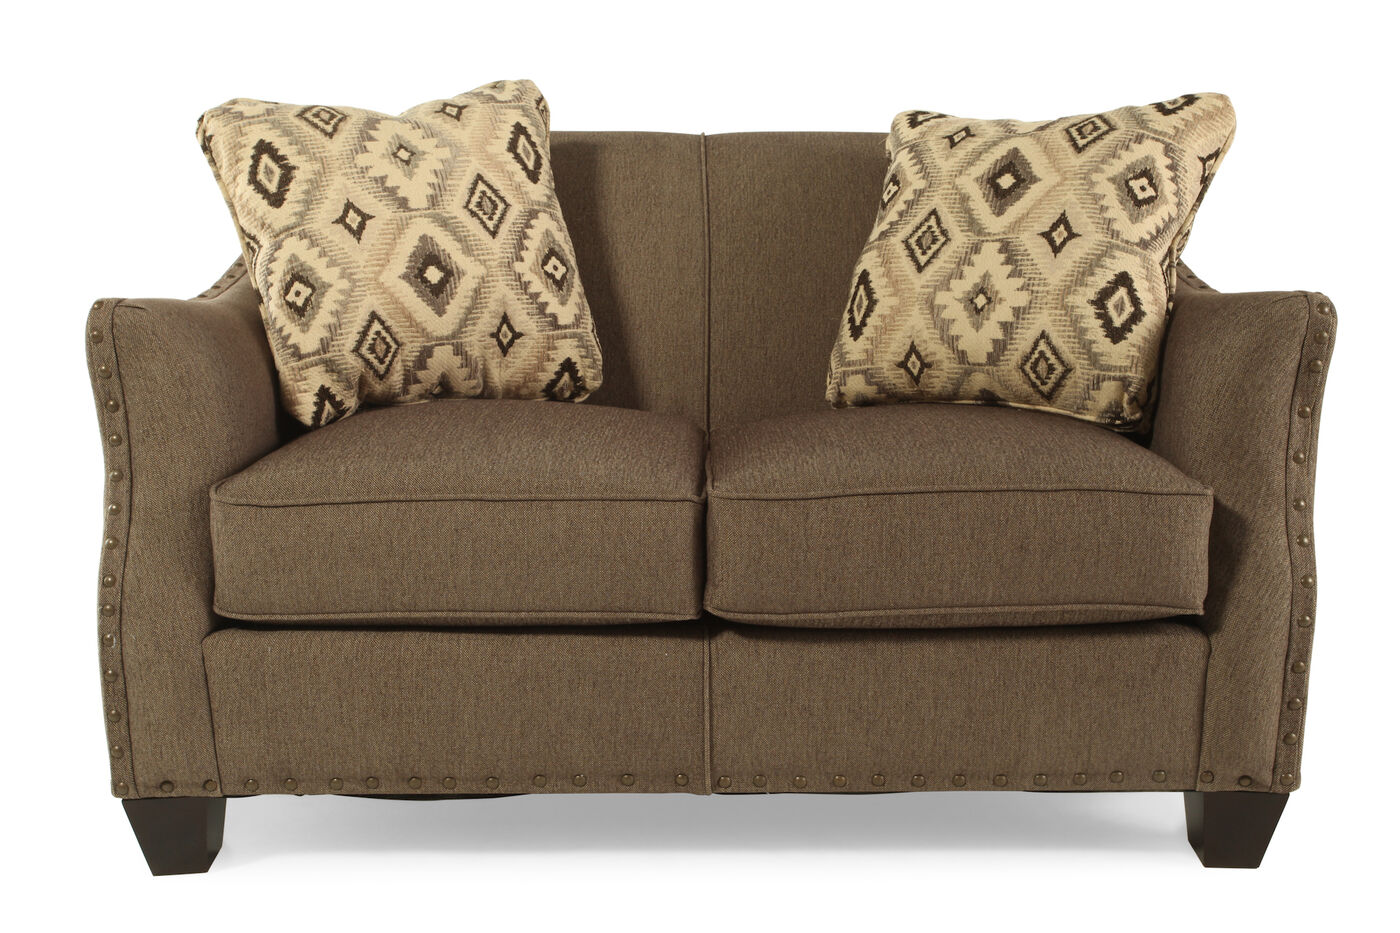 Textured Contemporary 54 5 Loveseat In Chocolate Mathis